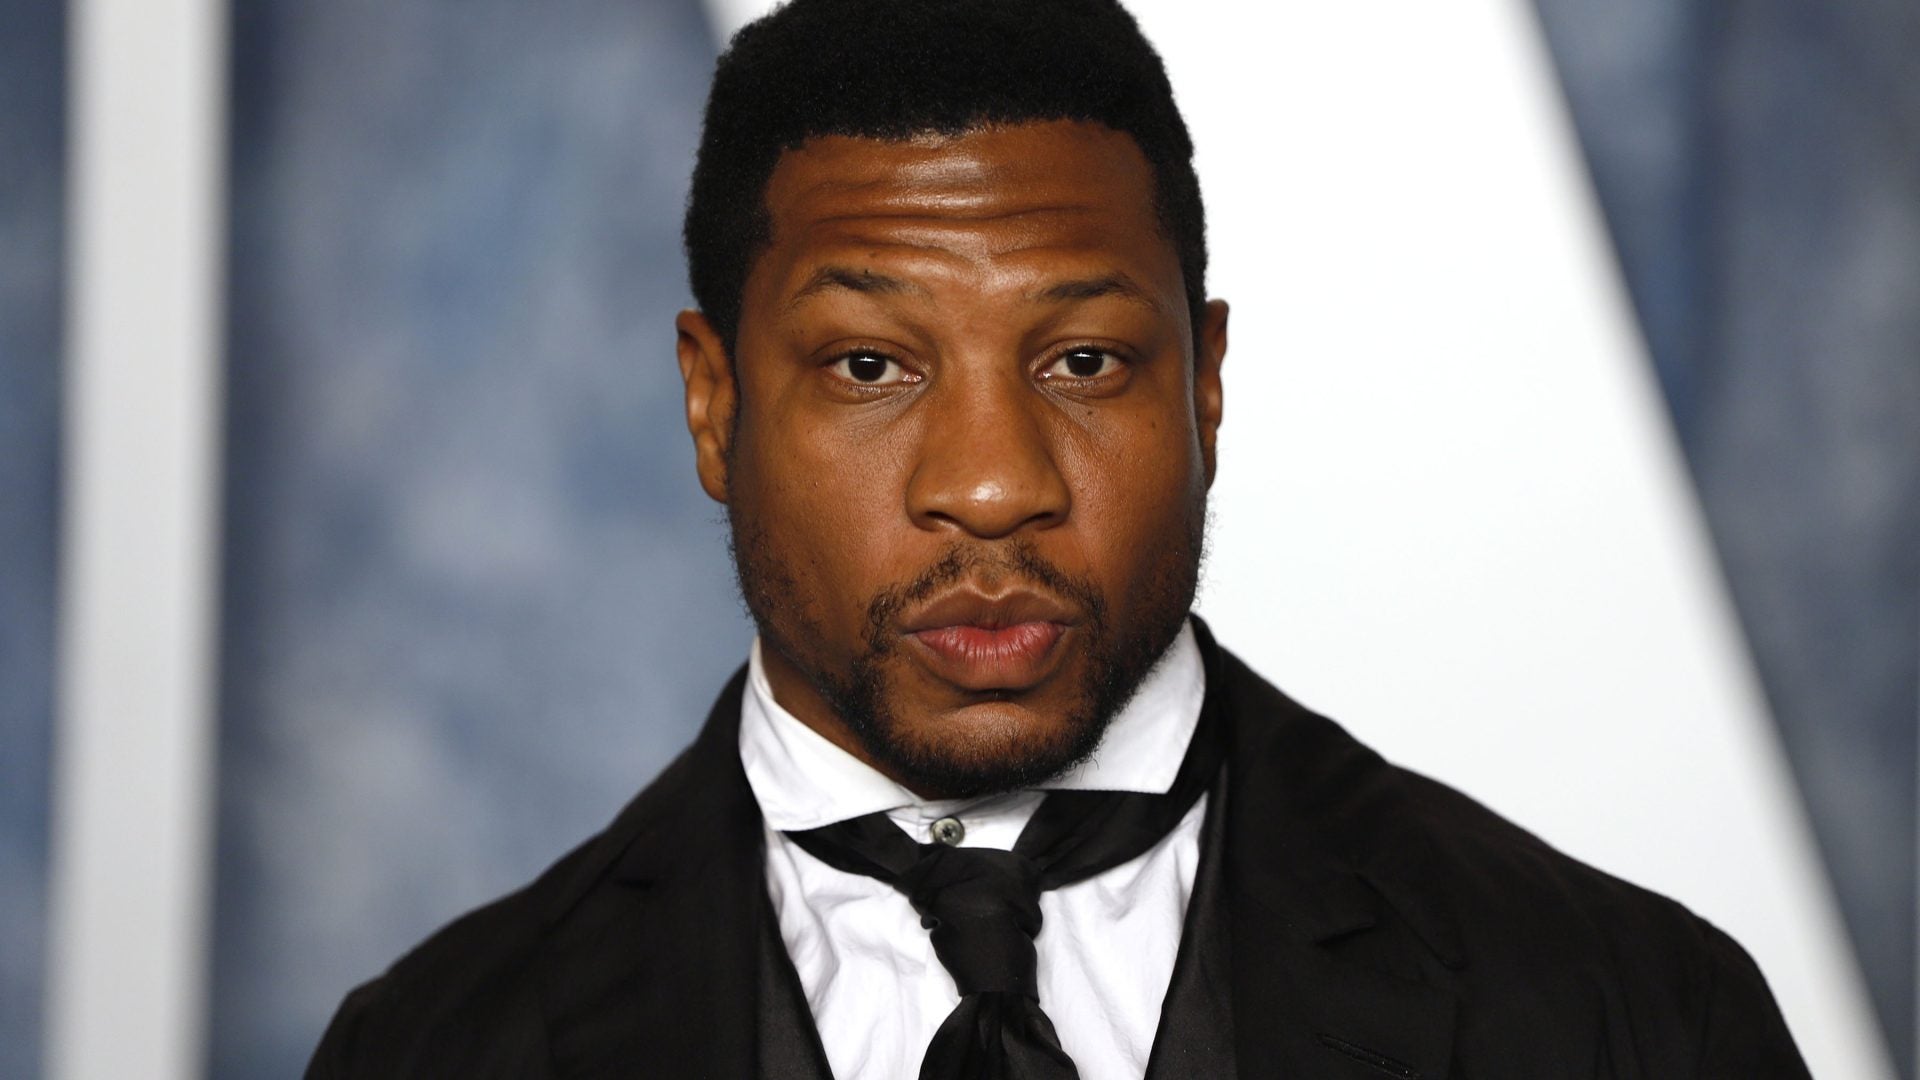 Jonathan Majors Arrested In New York For Alleged Assault, Lawyer Says Actor Is “Entirely Innocent”